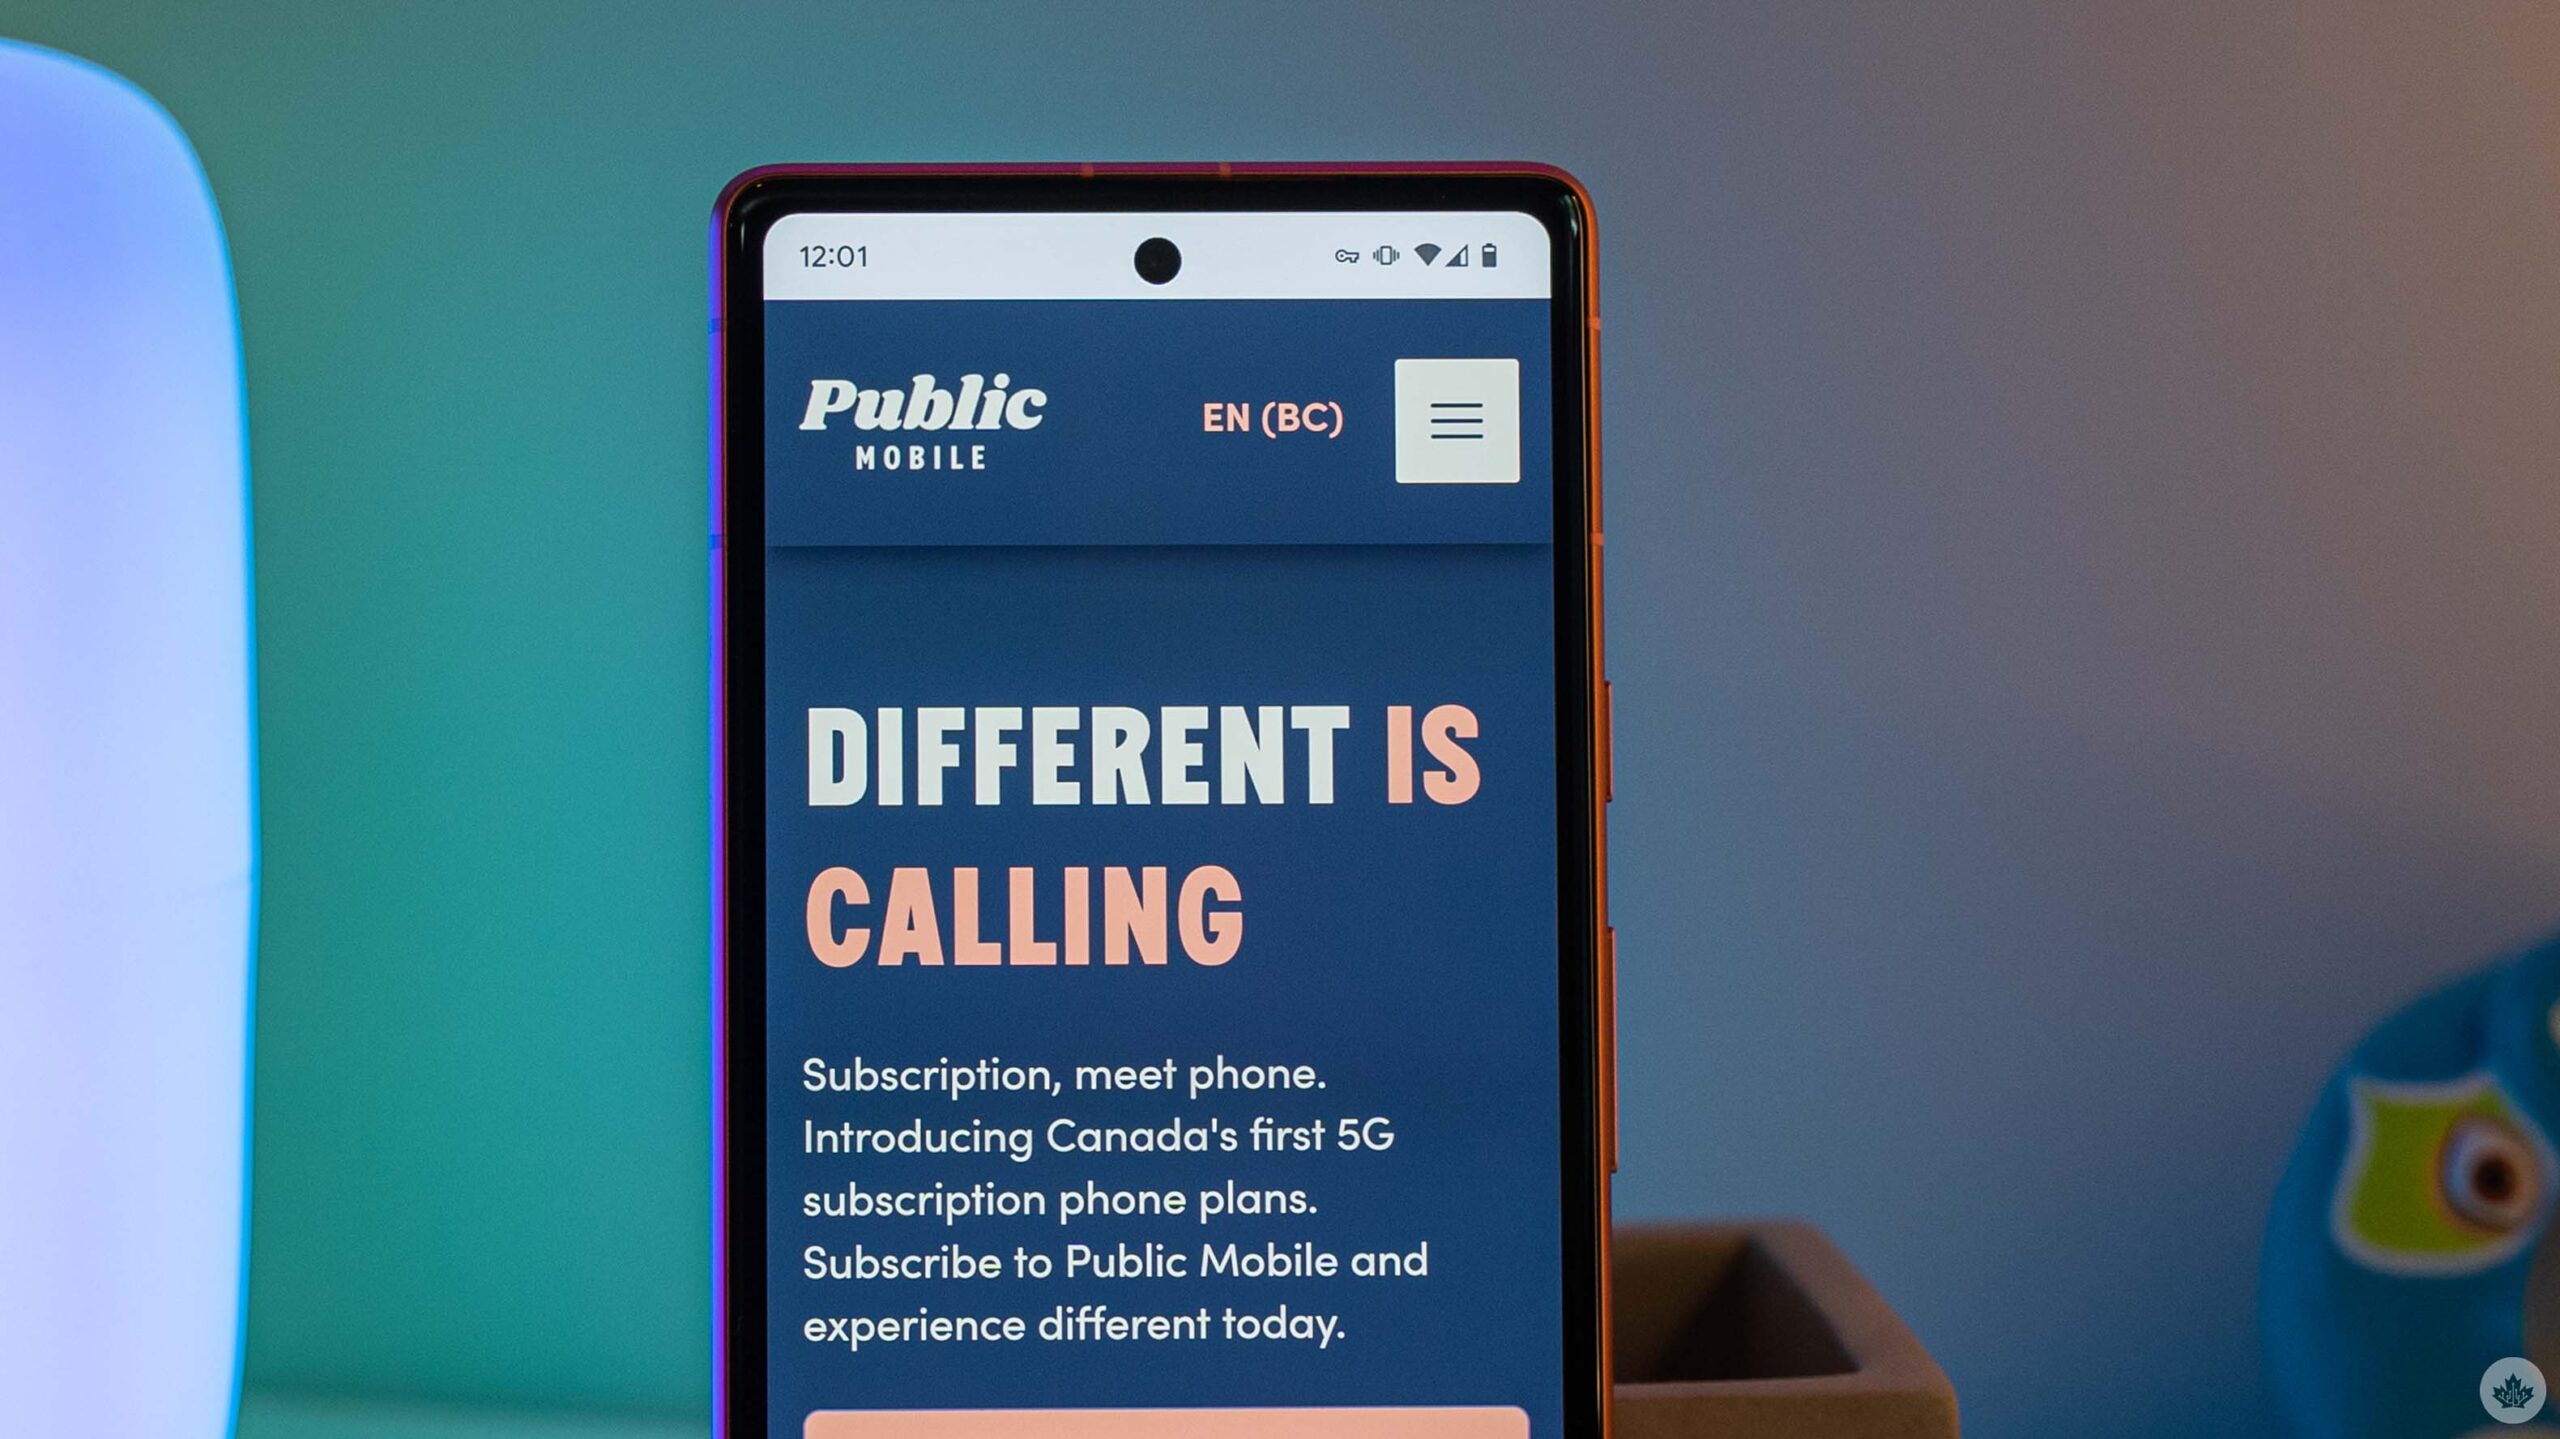 public-mobile-offering-20gb/$29-canada-and-us.-plan-in-quebec